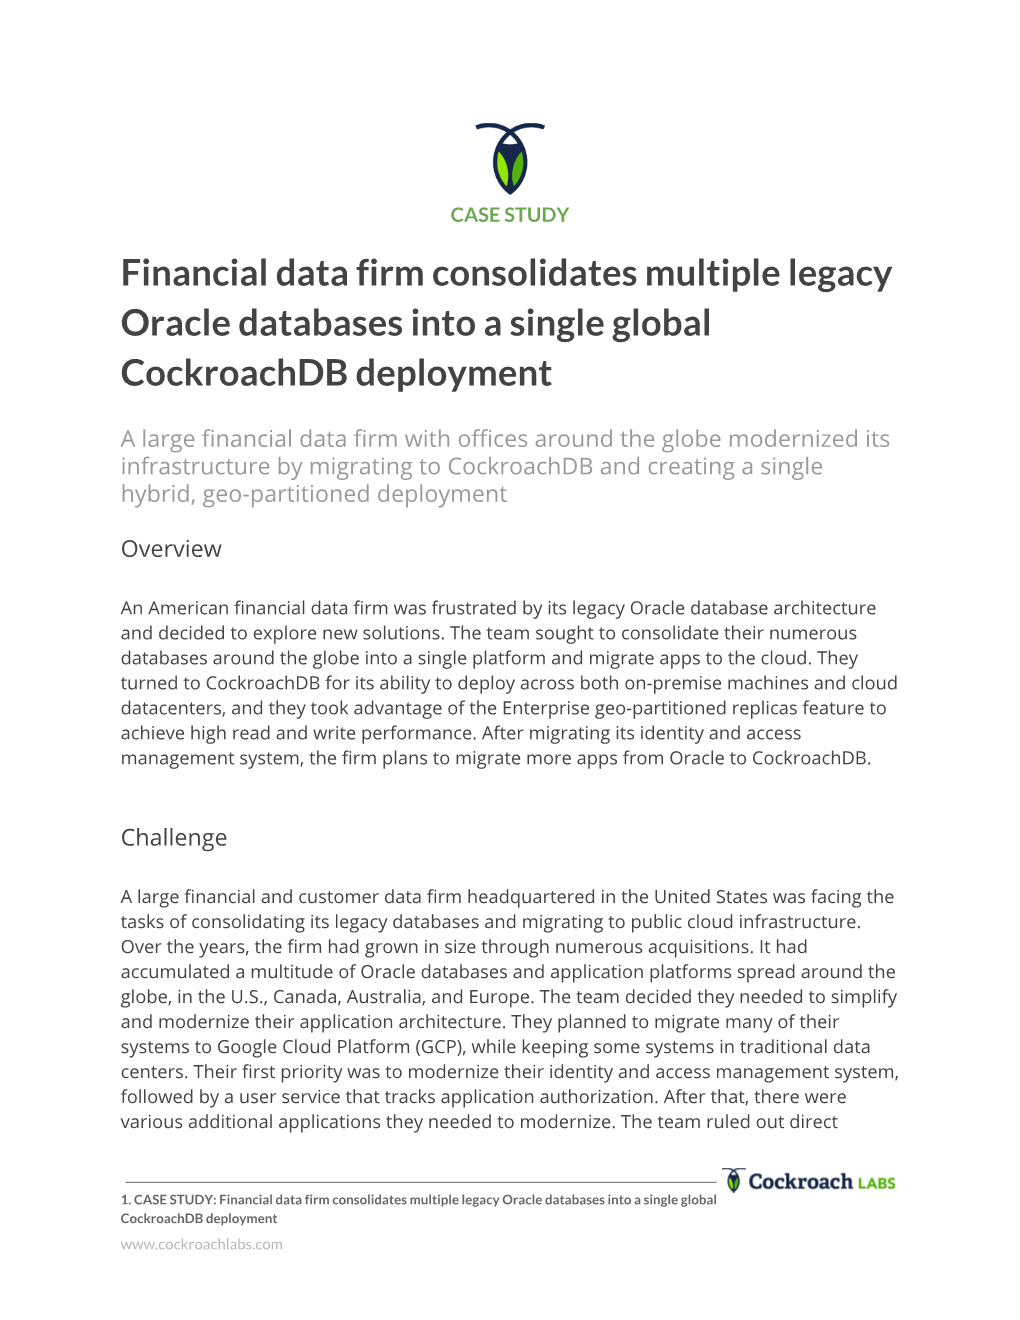 Financial Data Firm Consolidates Multiple Legacy Oracle Databases Into a Single Global Cockroachdb Deployment